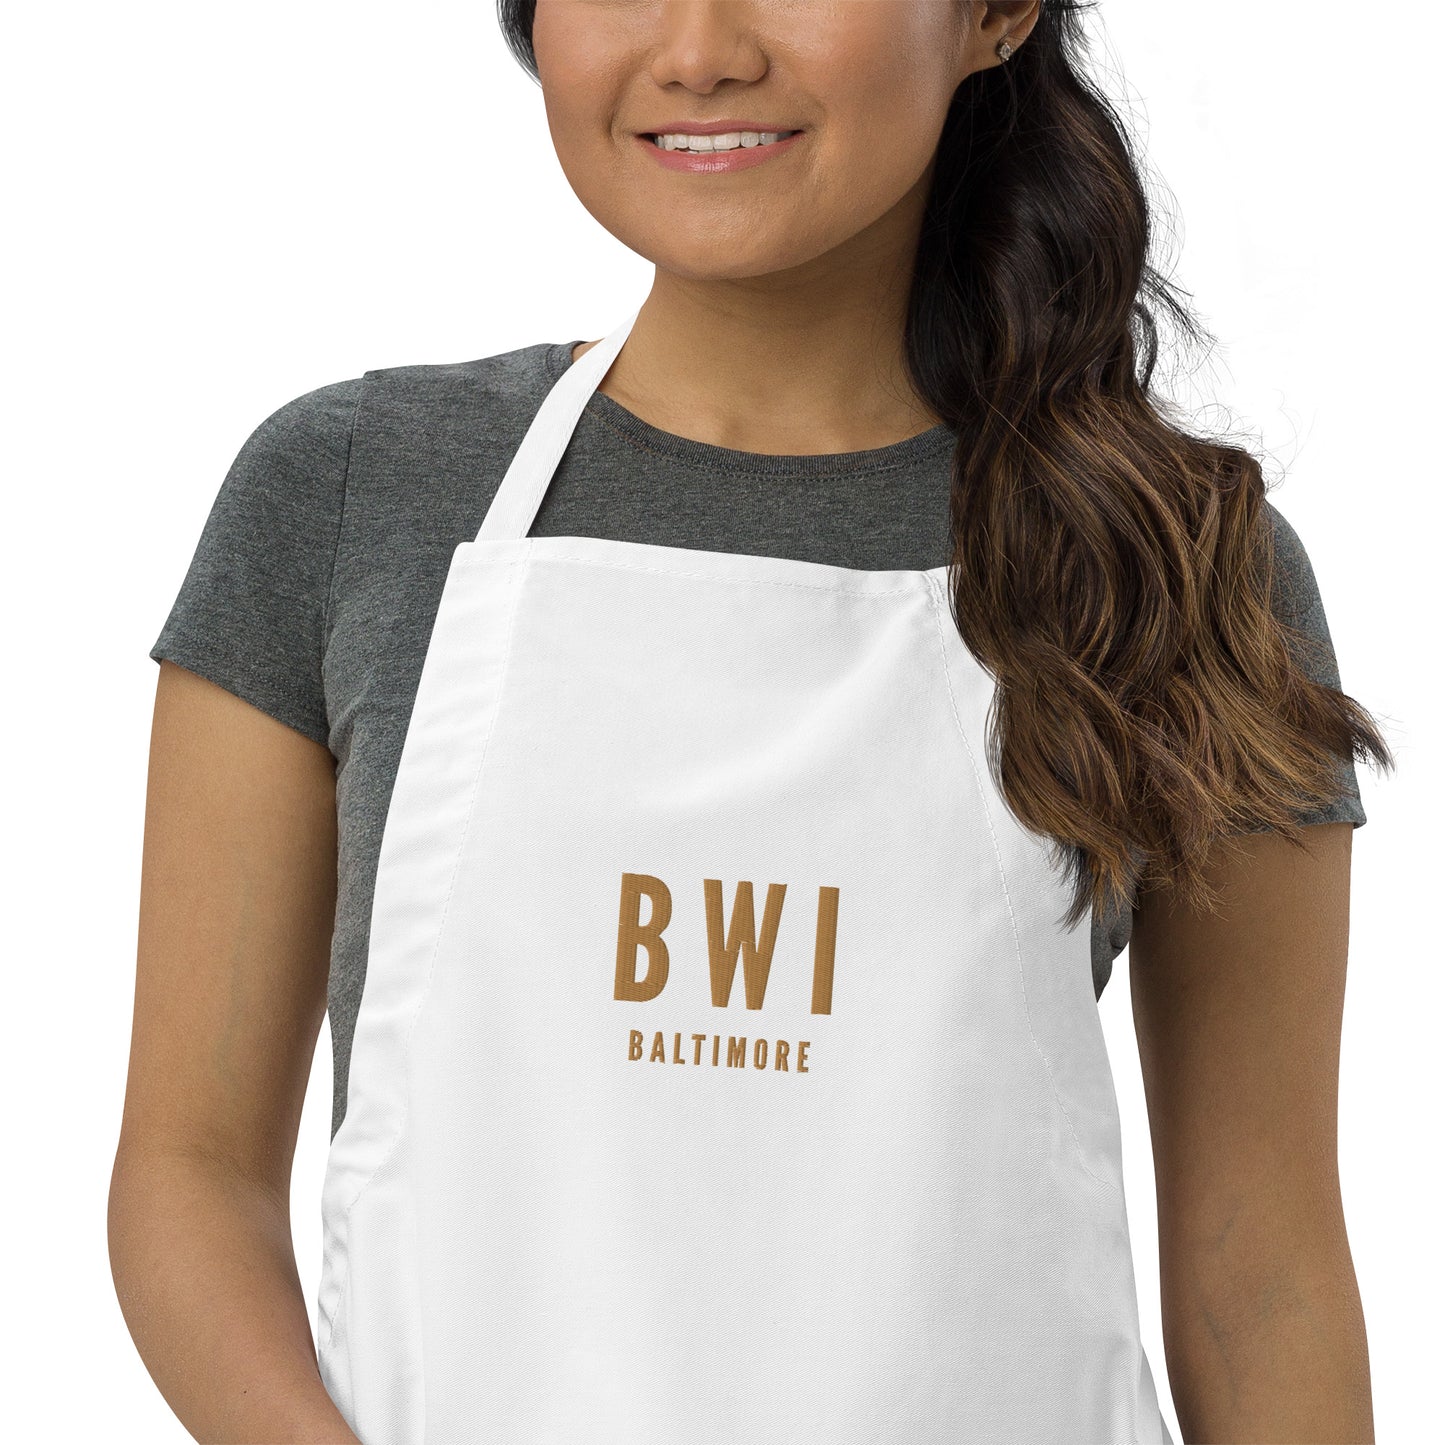 City Embroidered Apron - Old Gold • BWI Baltimore • YHM Designs - Image 08